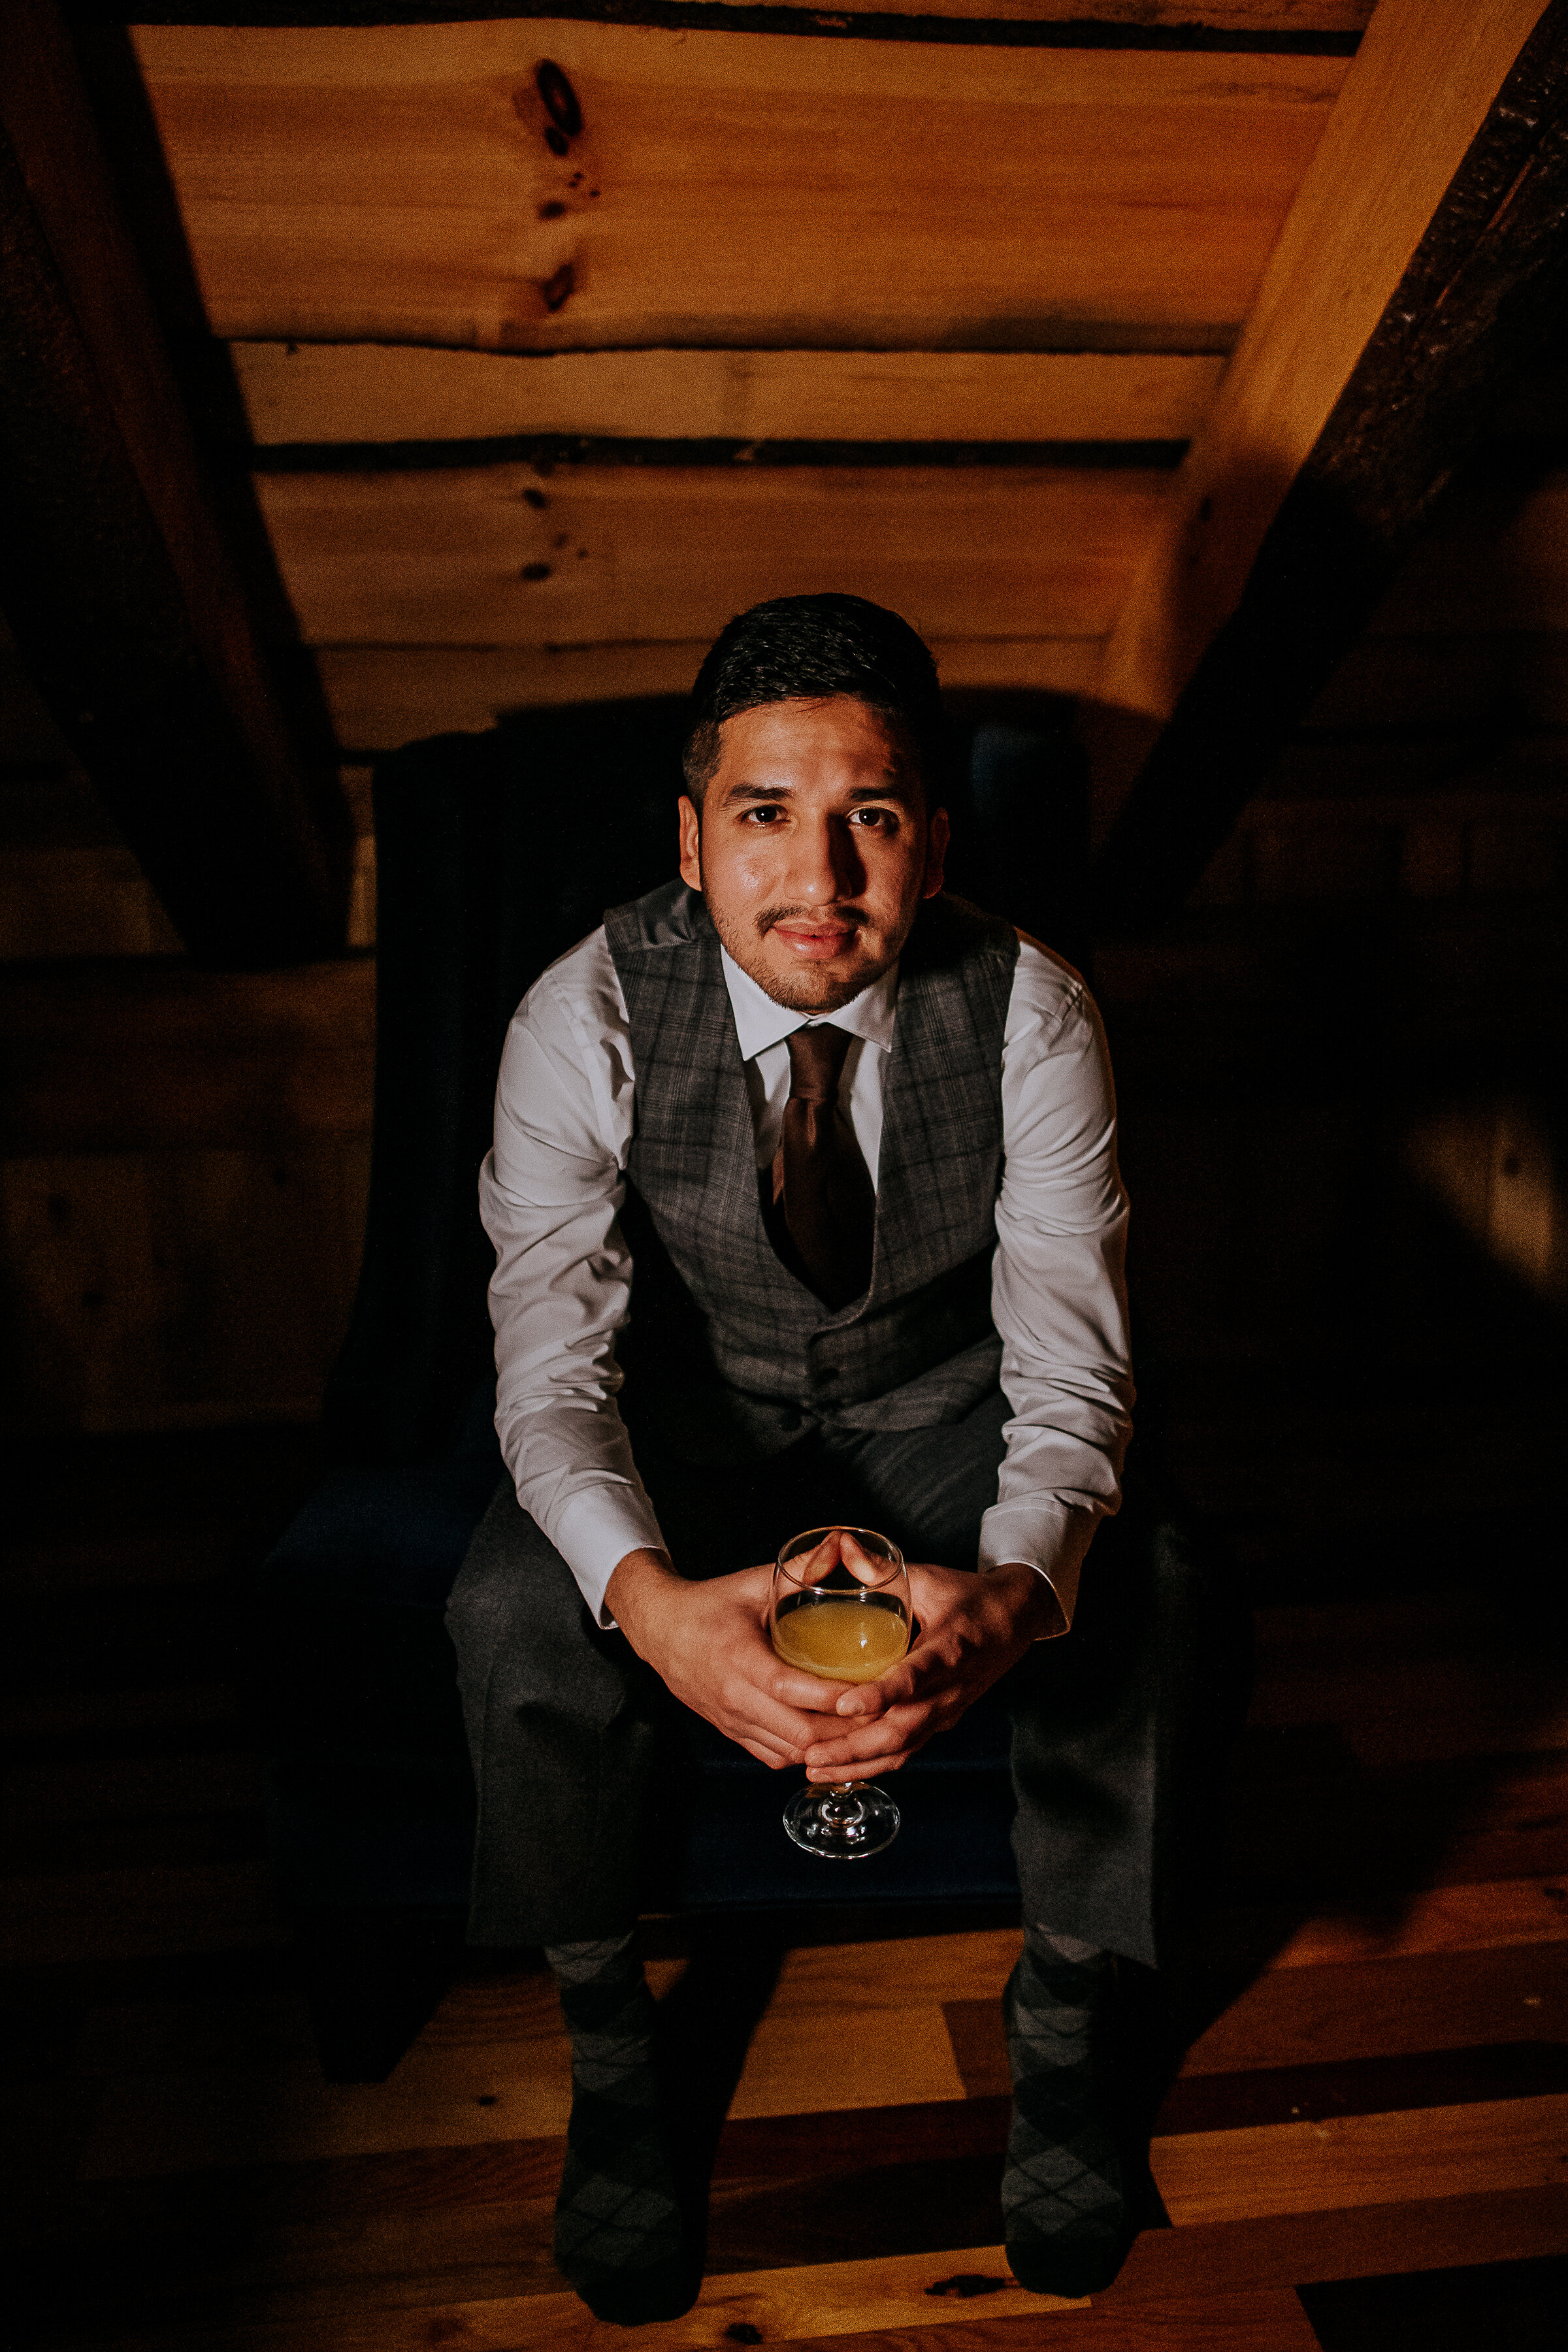  Kindred + Co. Photography captures groom eagerly awaiting his bride following a romantic candlelit elopement at the Grand Barn at the Mohicans. Gray tweed wedding best, wine colored wedding tie, groom, wedding wine, treehouse elopement, professional